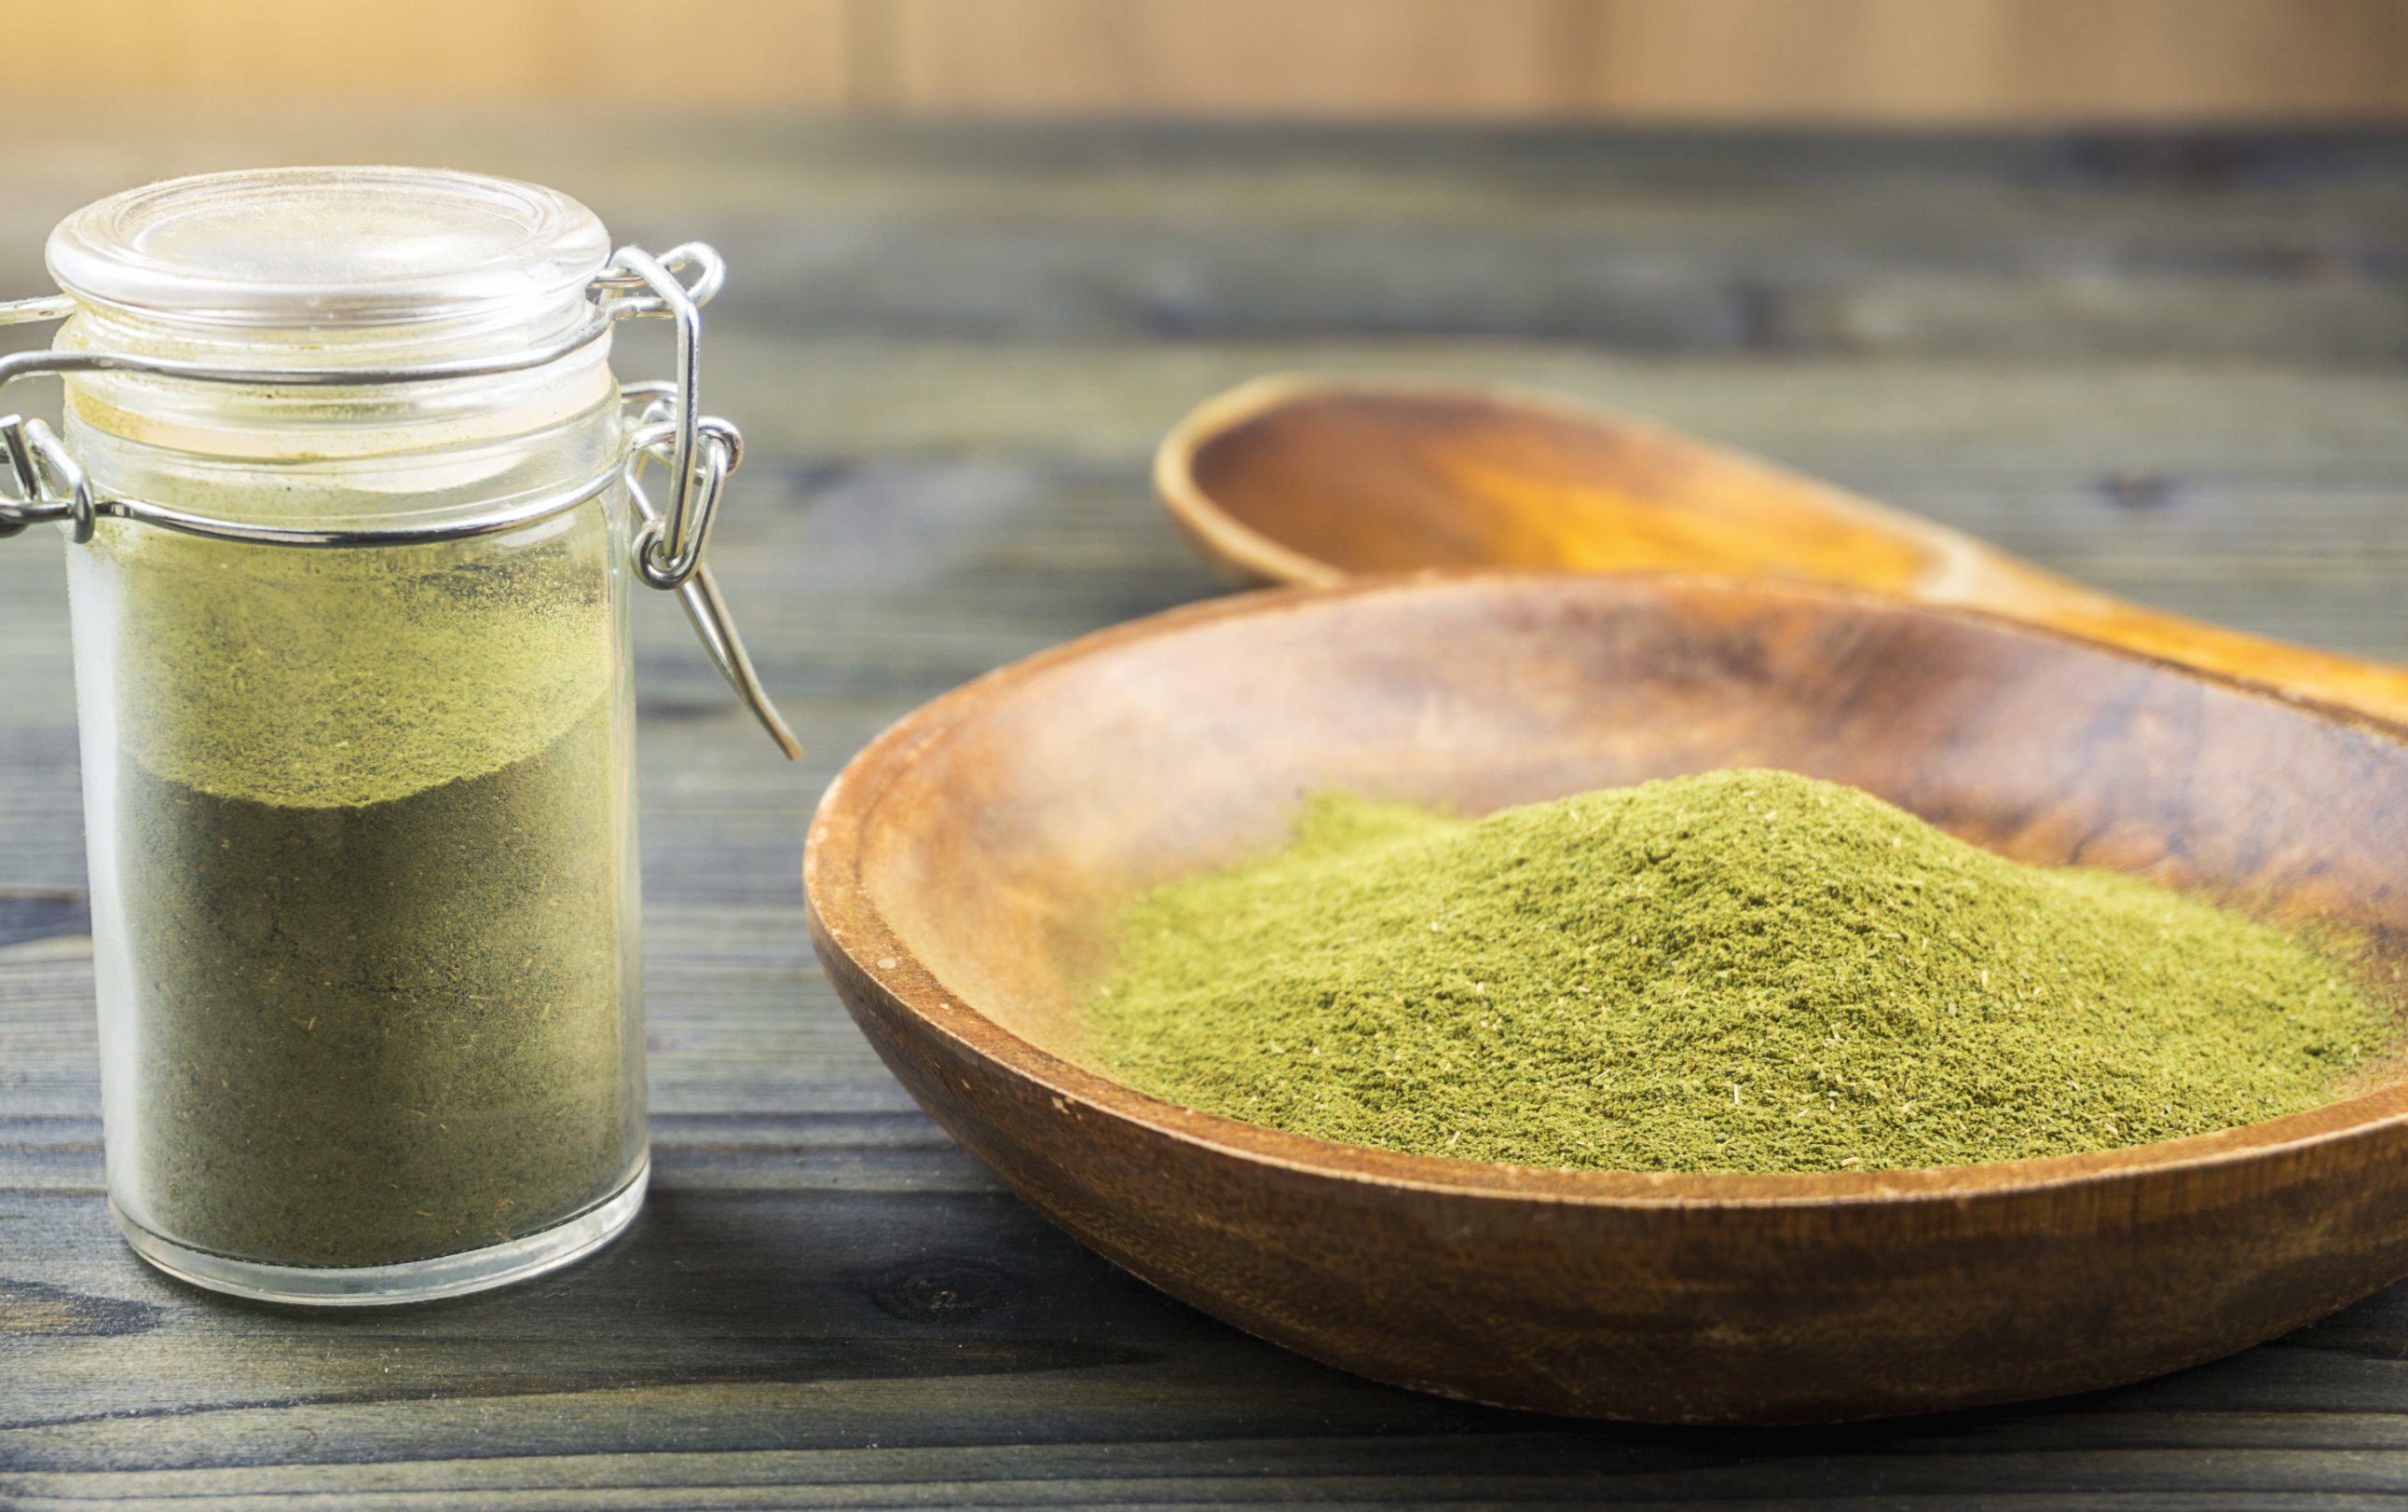 How to Store Kratom: The Ultimate Guide